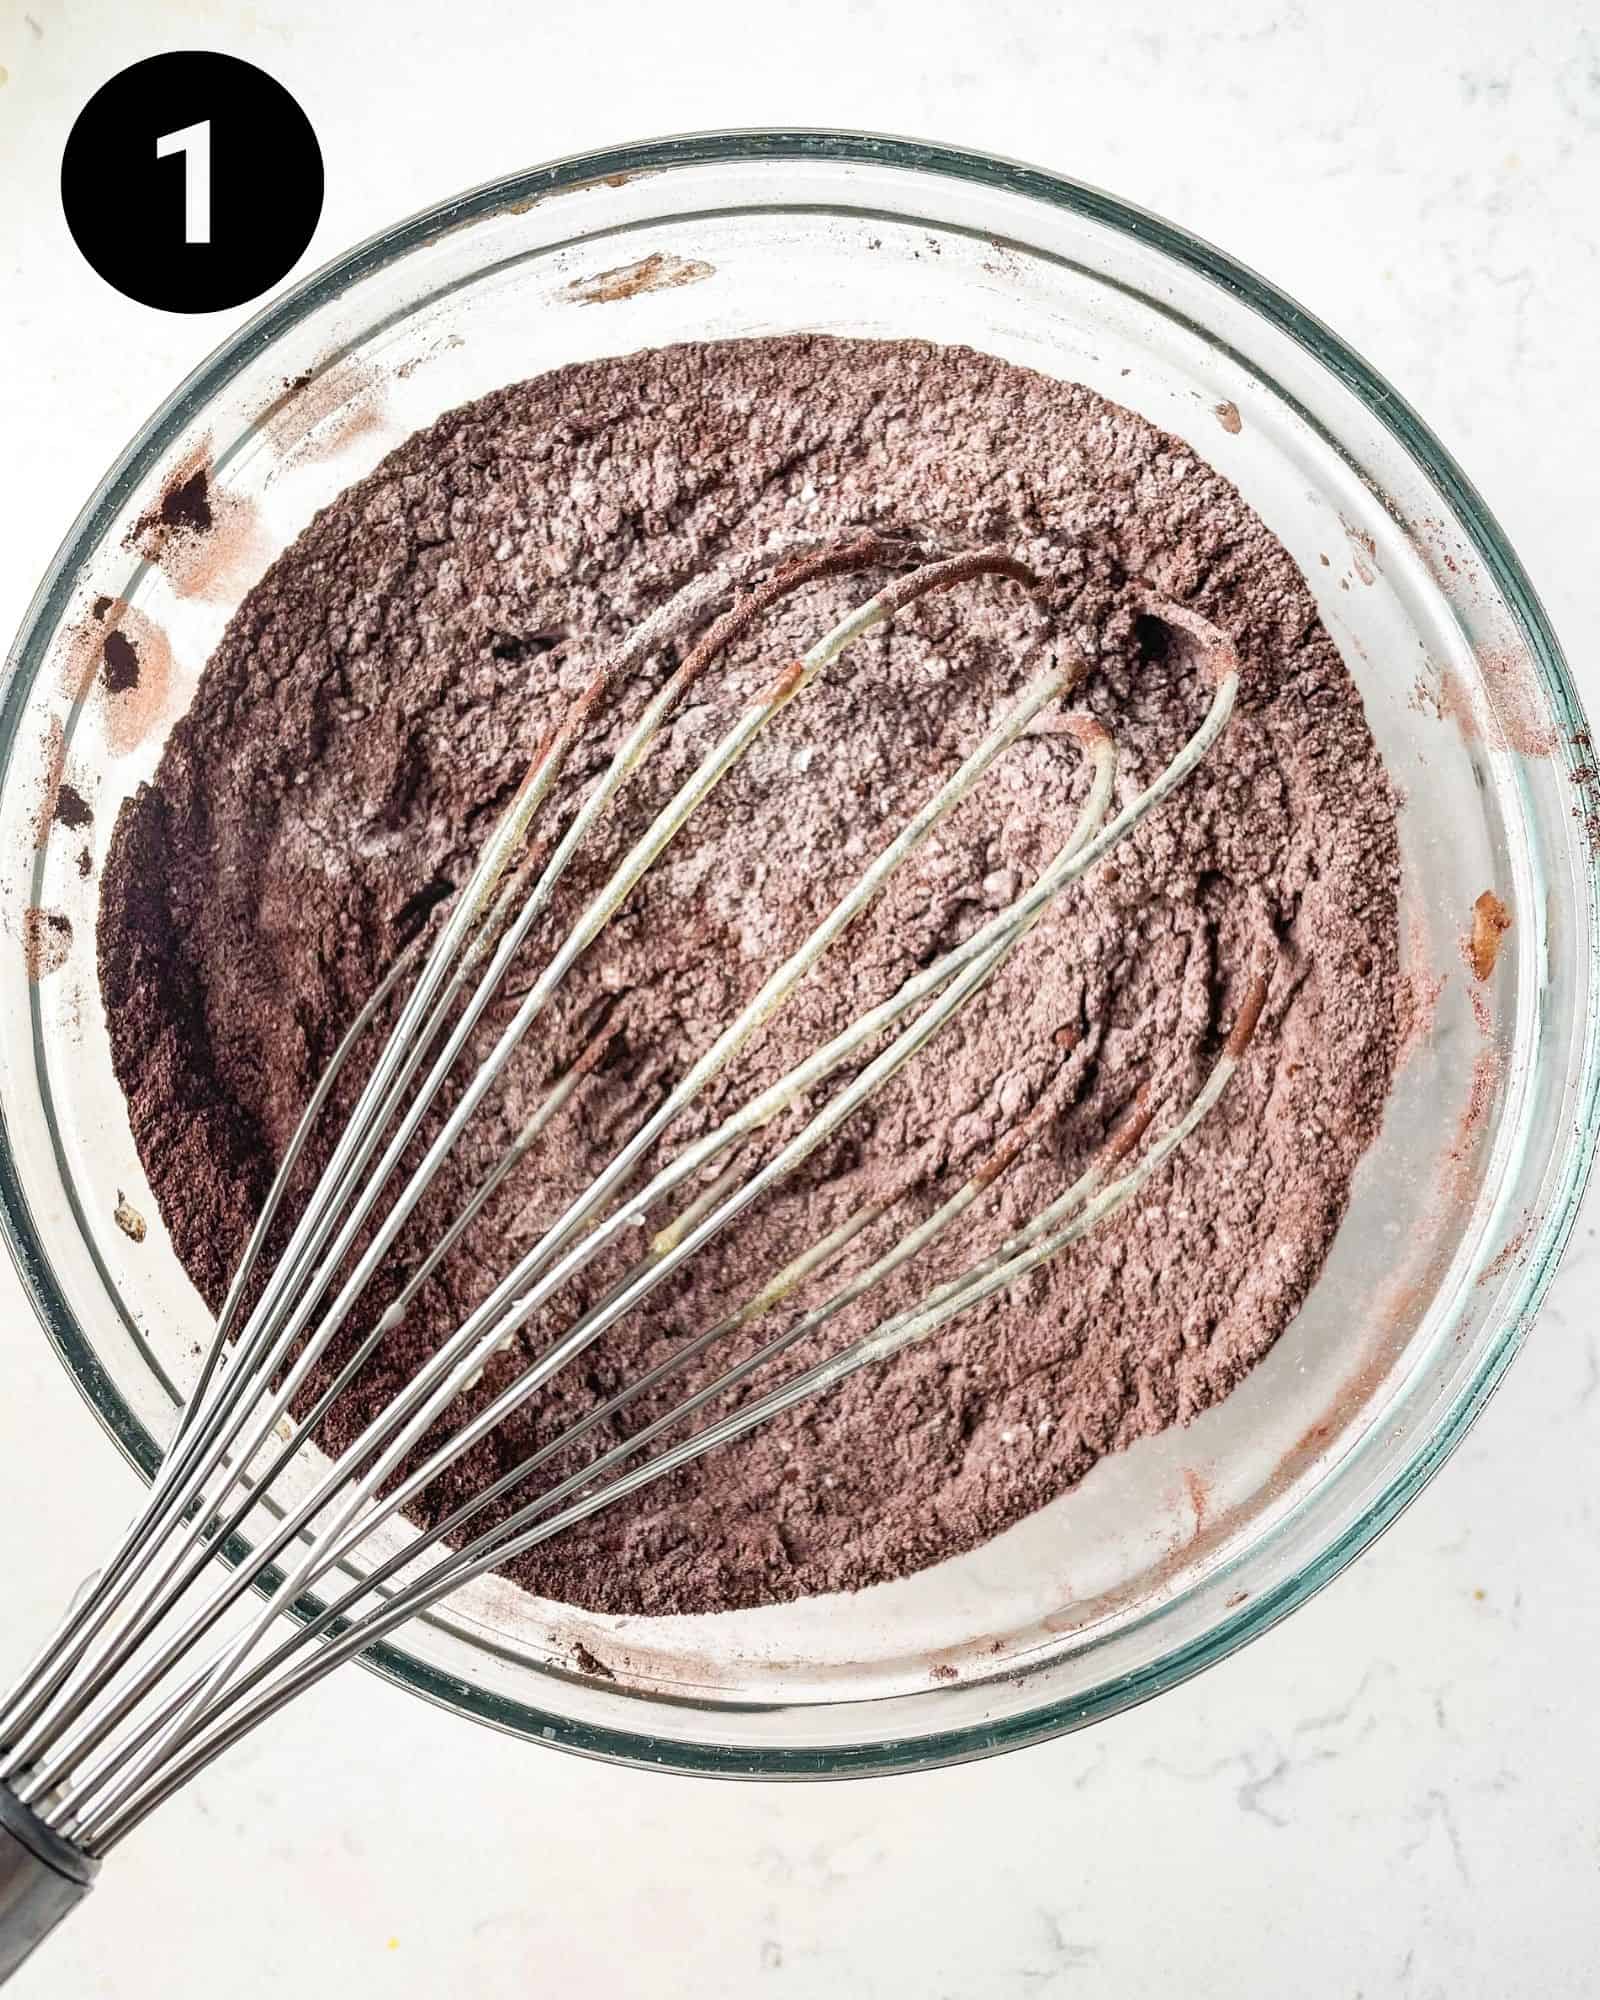 cocoa powder, flour, and salt whisked together in a mixing bowl.